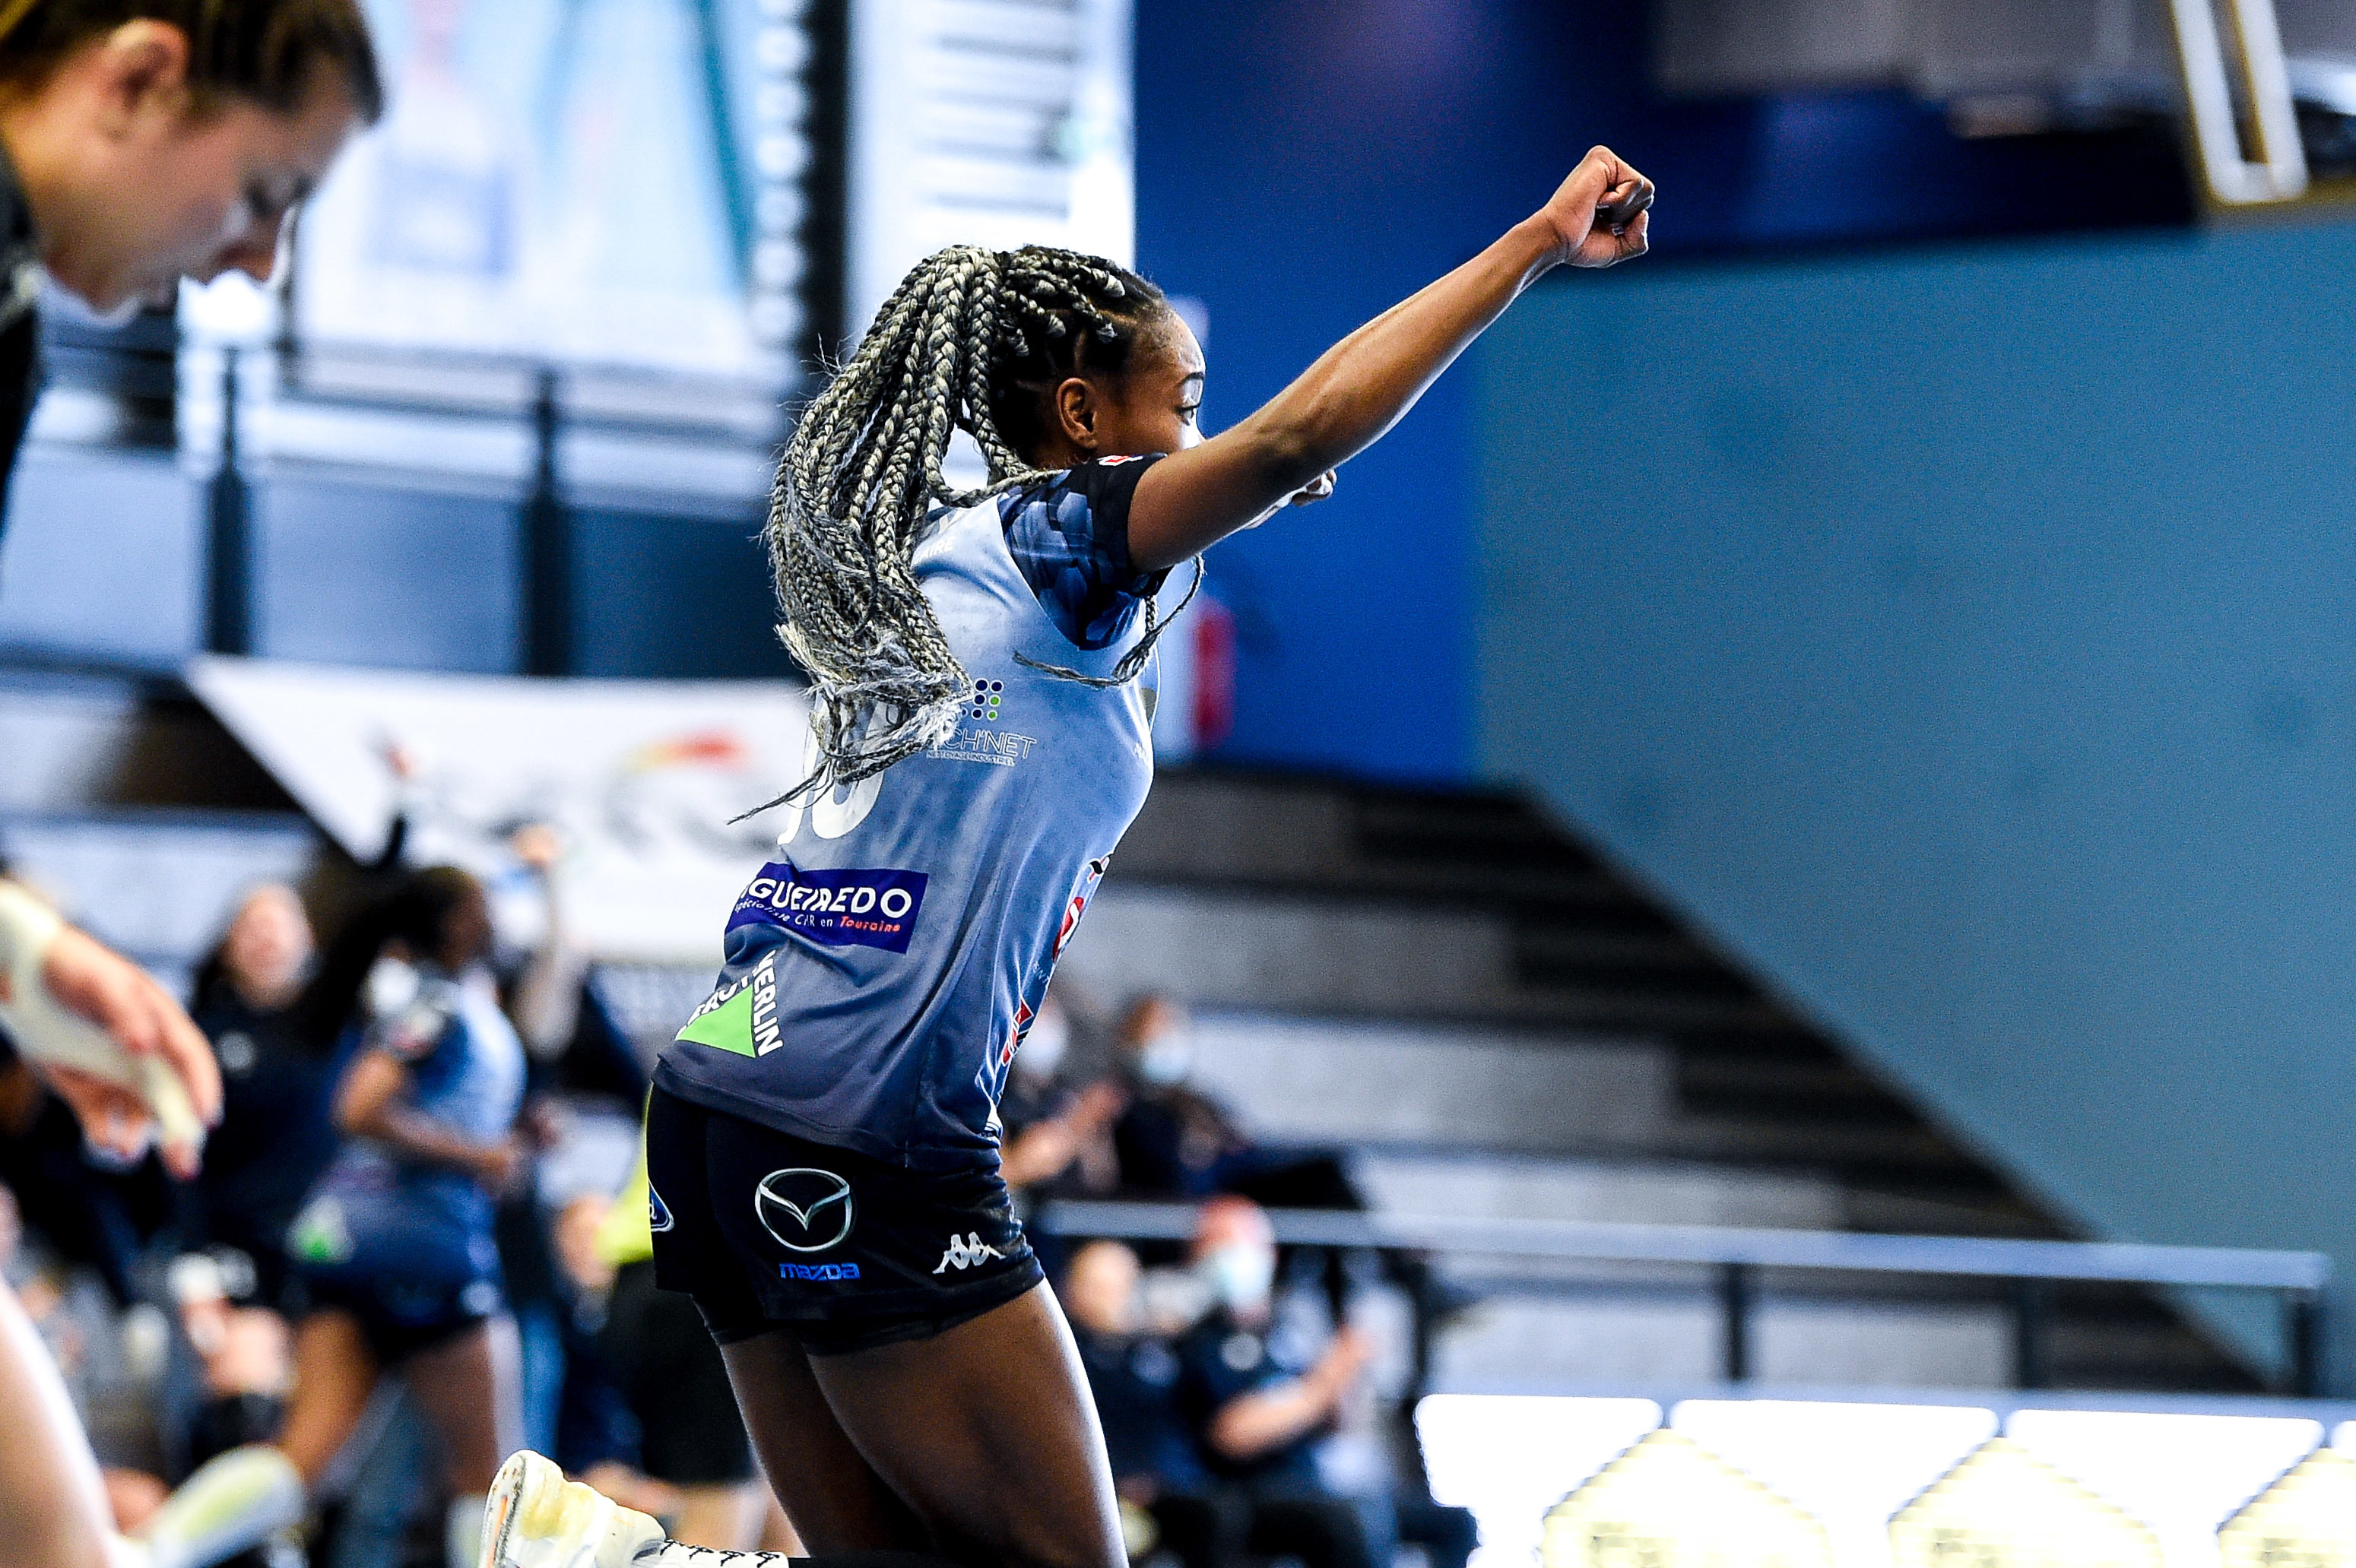 Estel MEMANA of CTHB celebrates during the Ligue Butagaz Energie match between Chambray and Paris 92 on May 8, 2021 in Chambray-les-Tours, France. (Photo by Hugo Pfeiffer/Icon Sport)